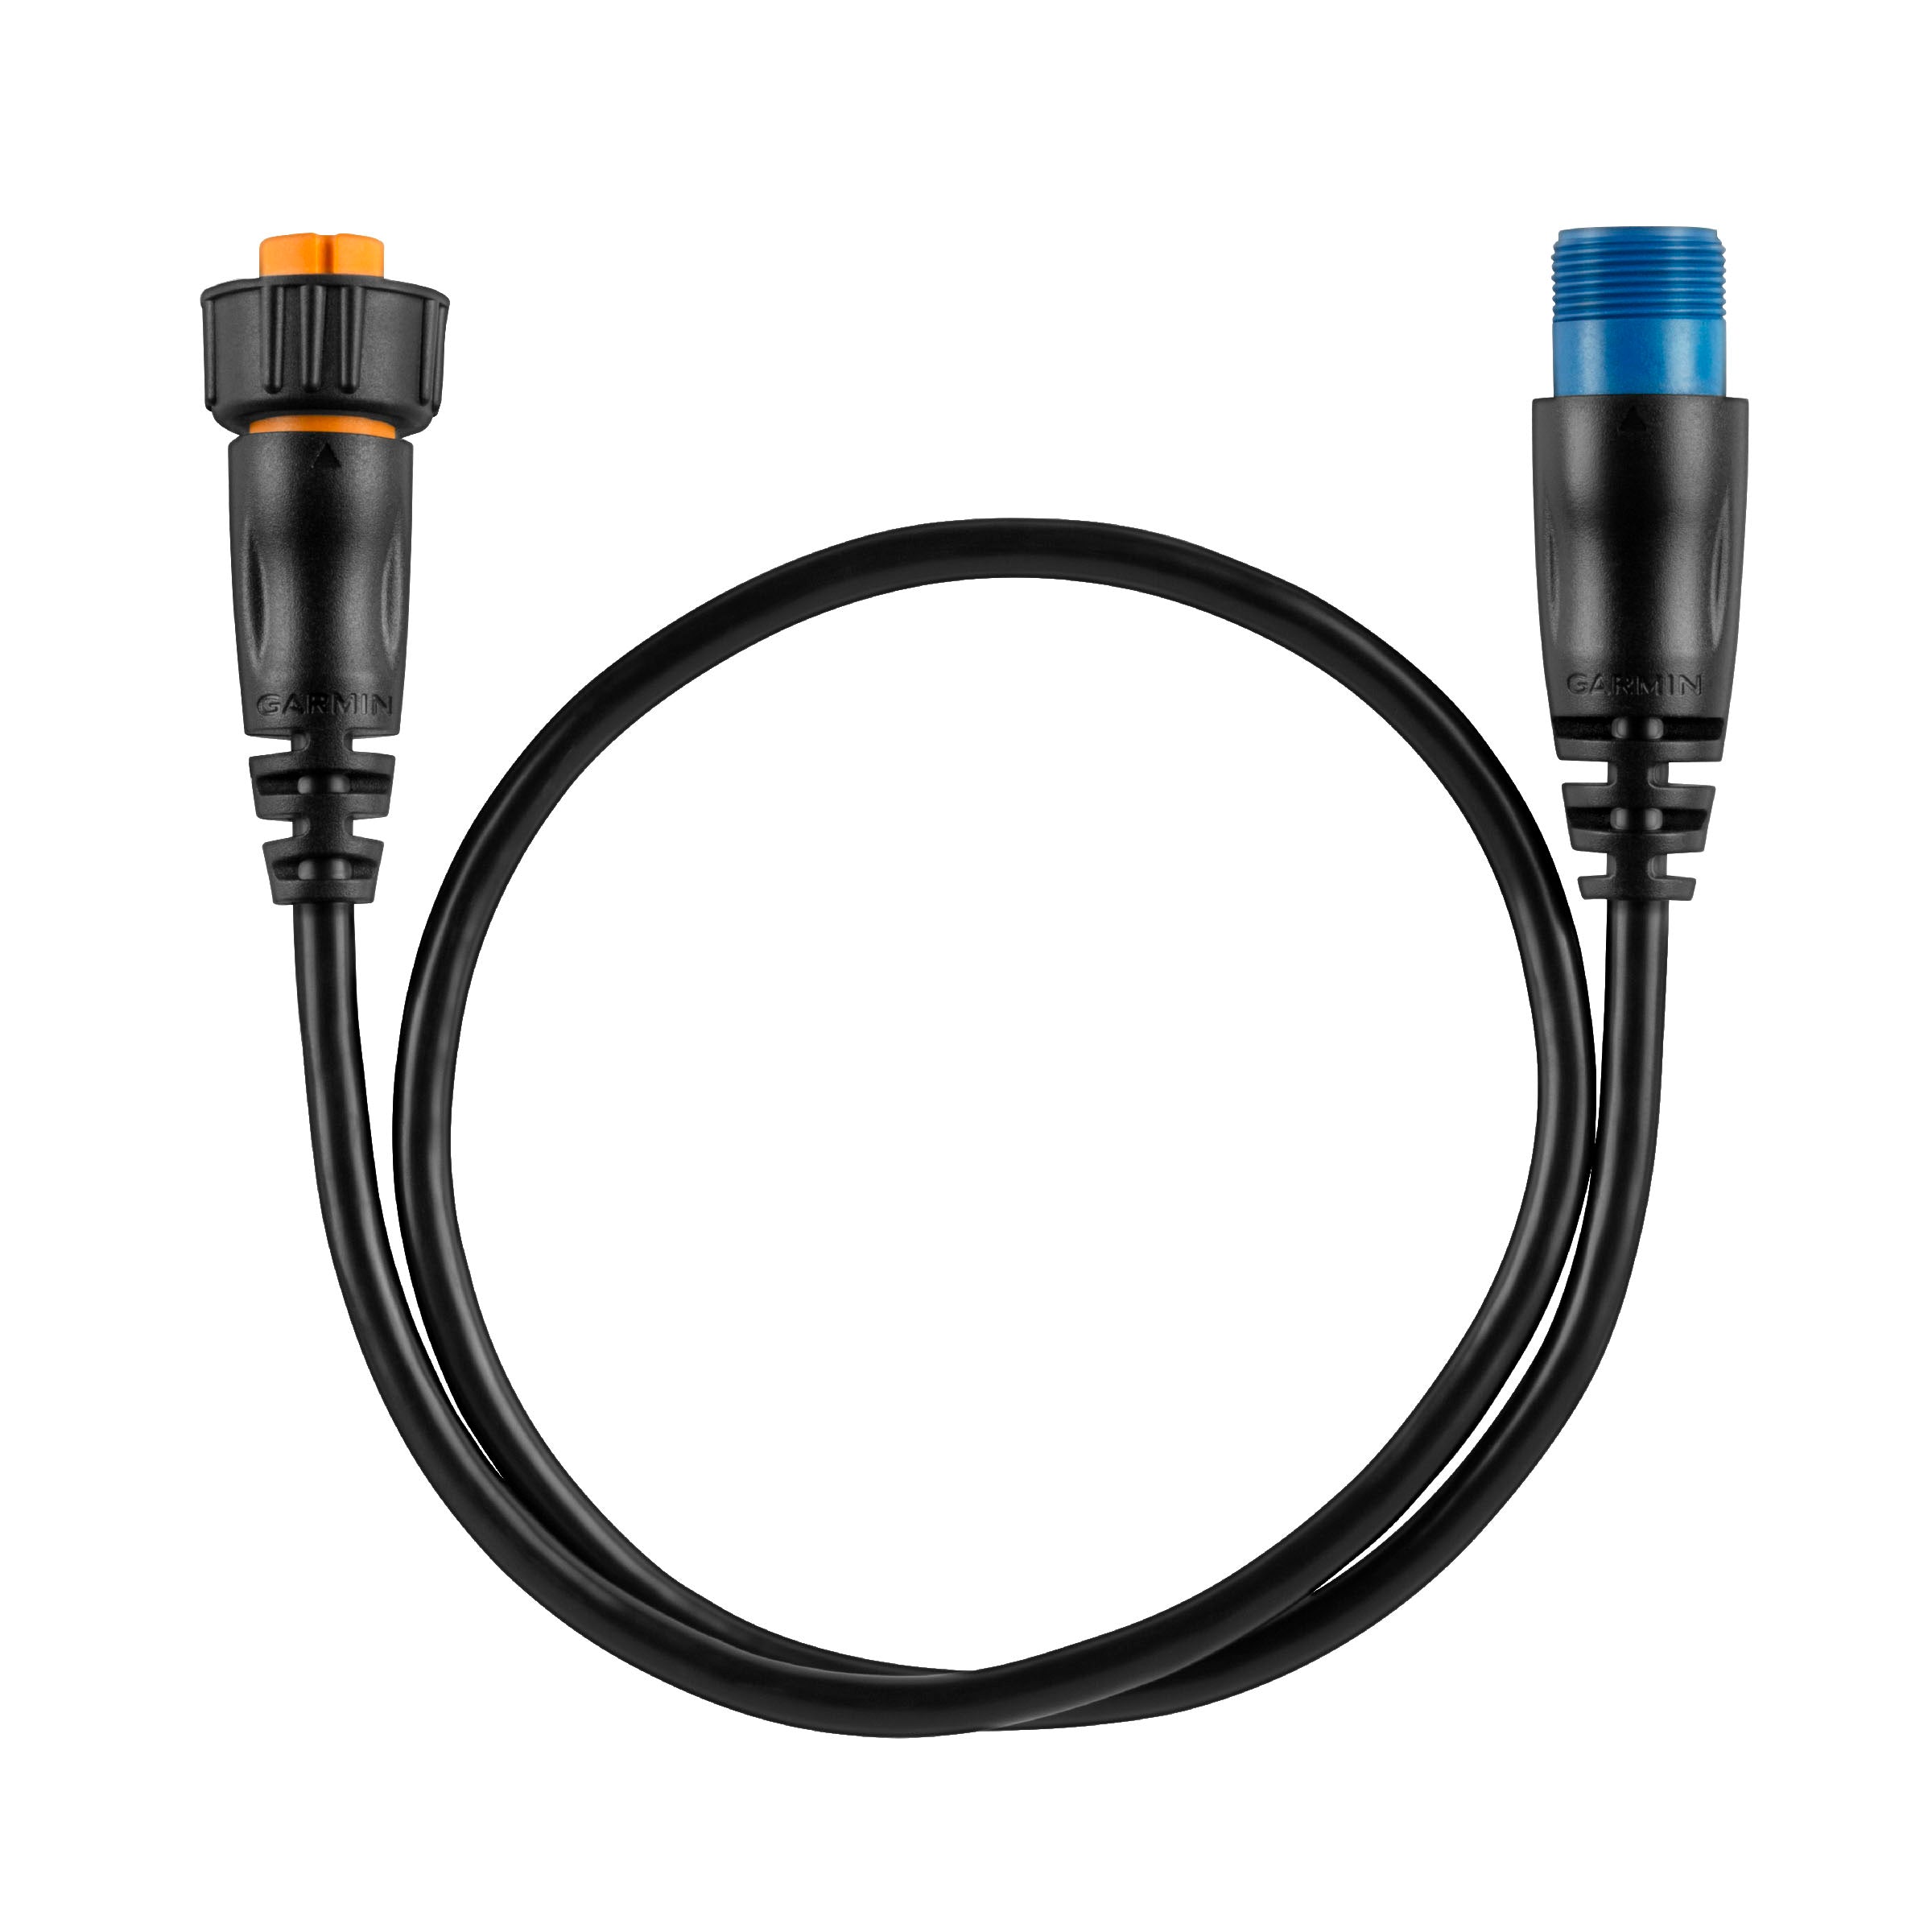 Garmin 8-pin Transducer to 12-pin Sounder Adapter Cable with XID